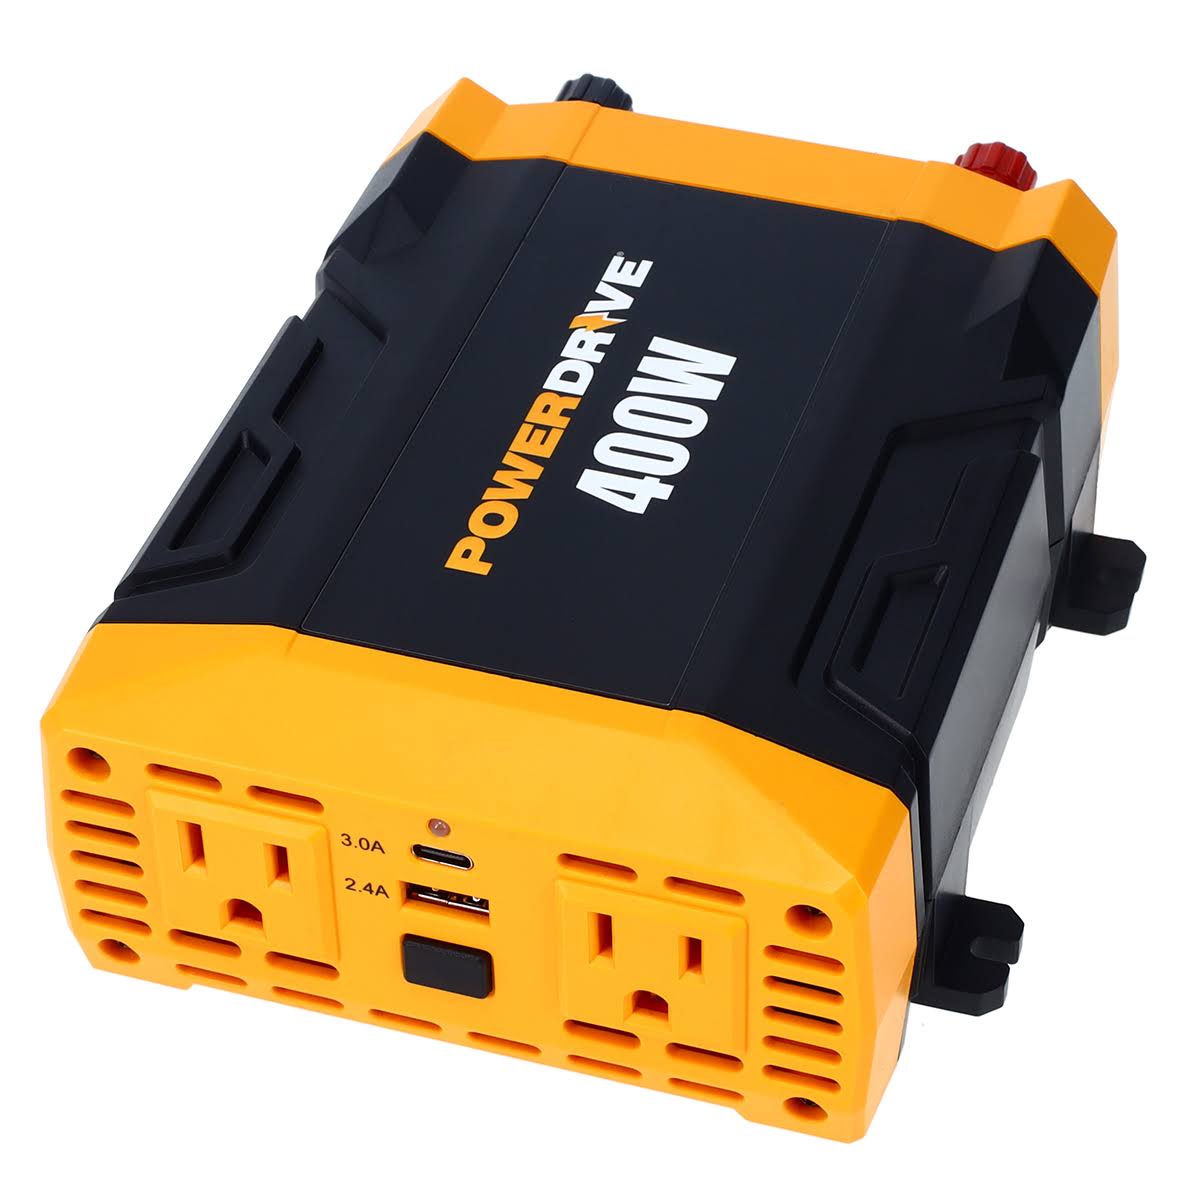 Powerdrive PWD400 400 Watt Power Inverter 12V DC To 110V AC with 2 Outlets and 2 Ports